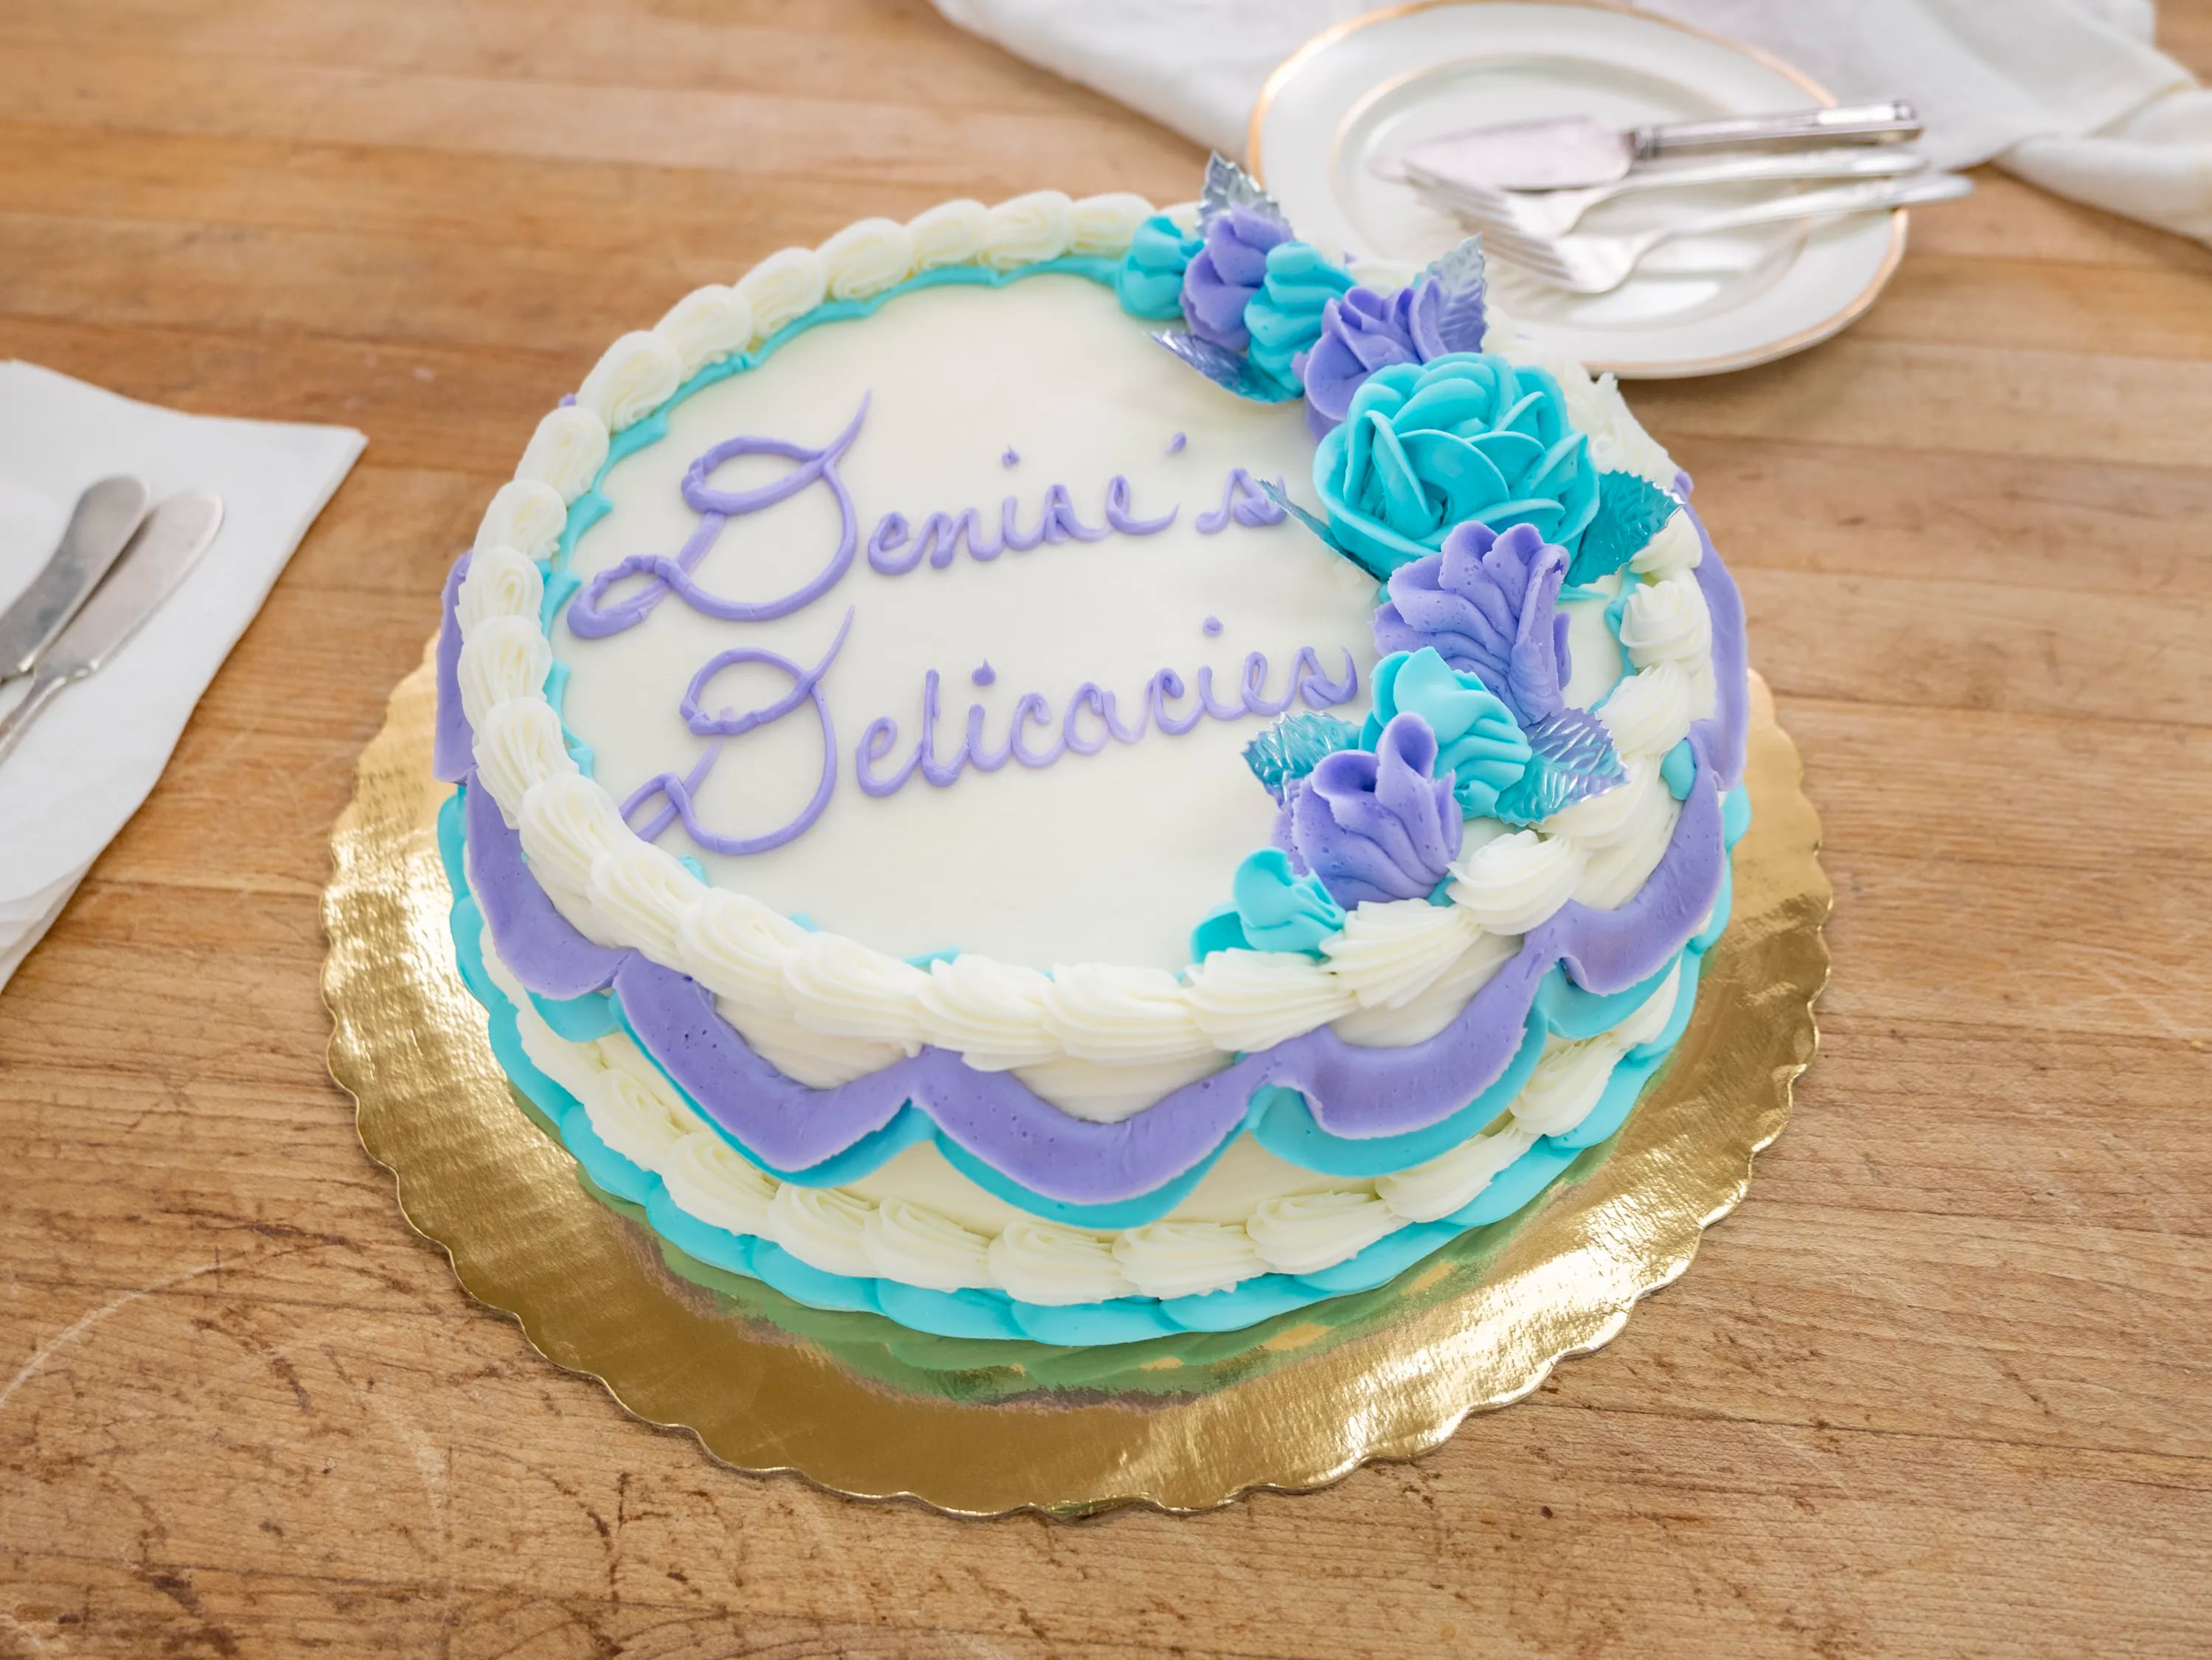 In North Philly, Denise's Delicacies offer custom cakes for all your celebrations.